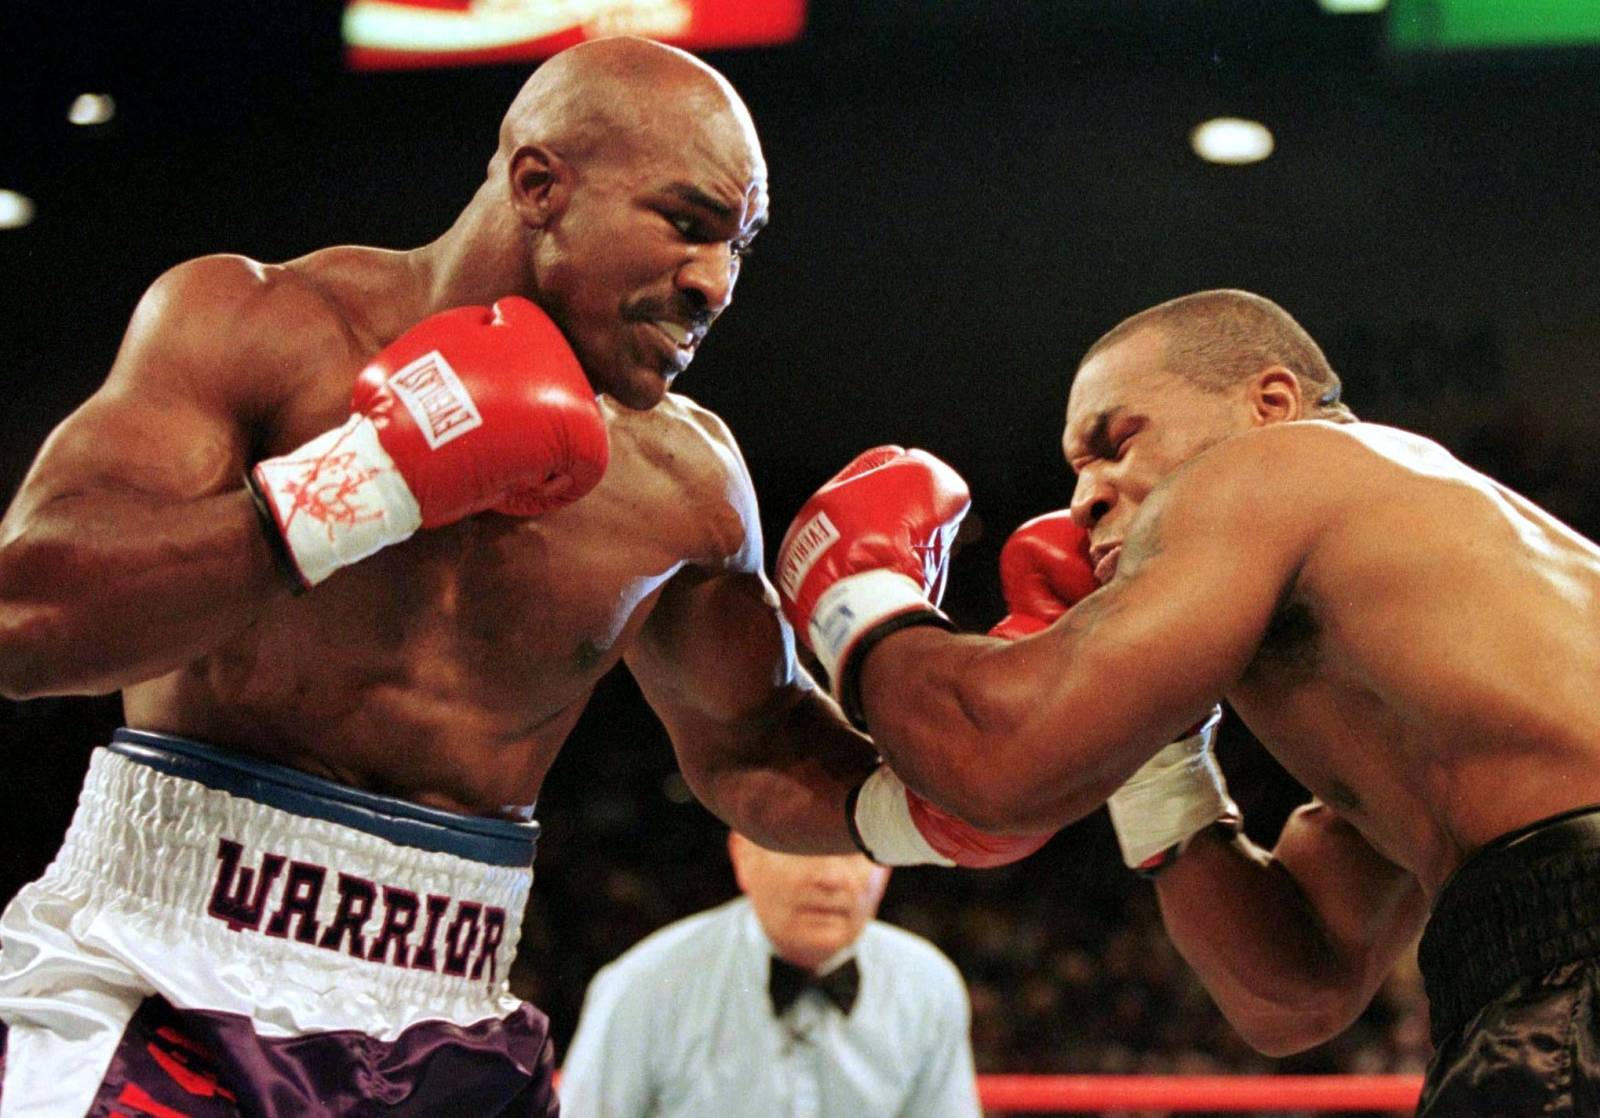 FILE PHOTO: WBA Heavyweight Champion Evander Holyfield (R) connects to the jaw of challenger Mike Tyson in the f..